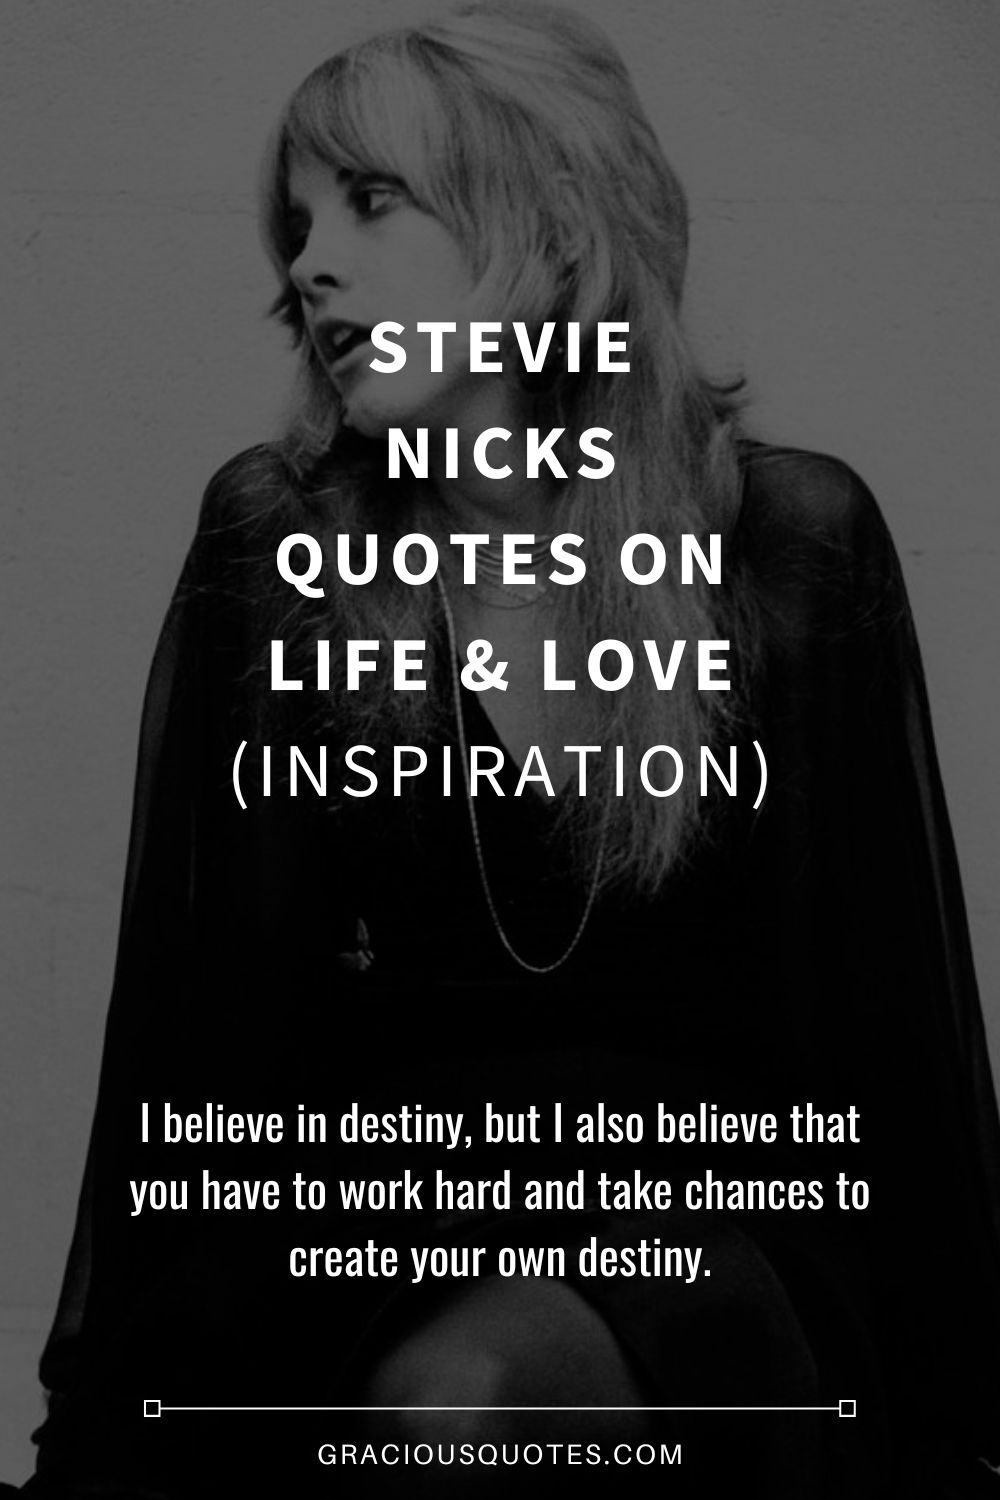 Stevie Nicks Quotes on Life & Love (INSPIRATION) - Gracious Quotes